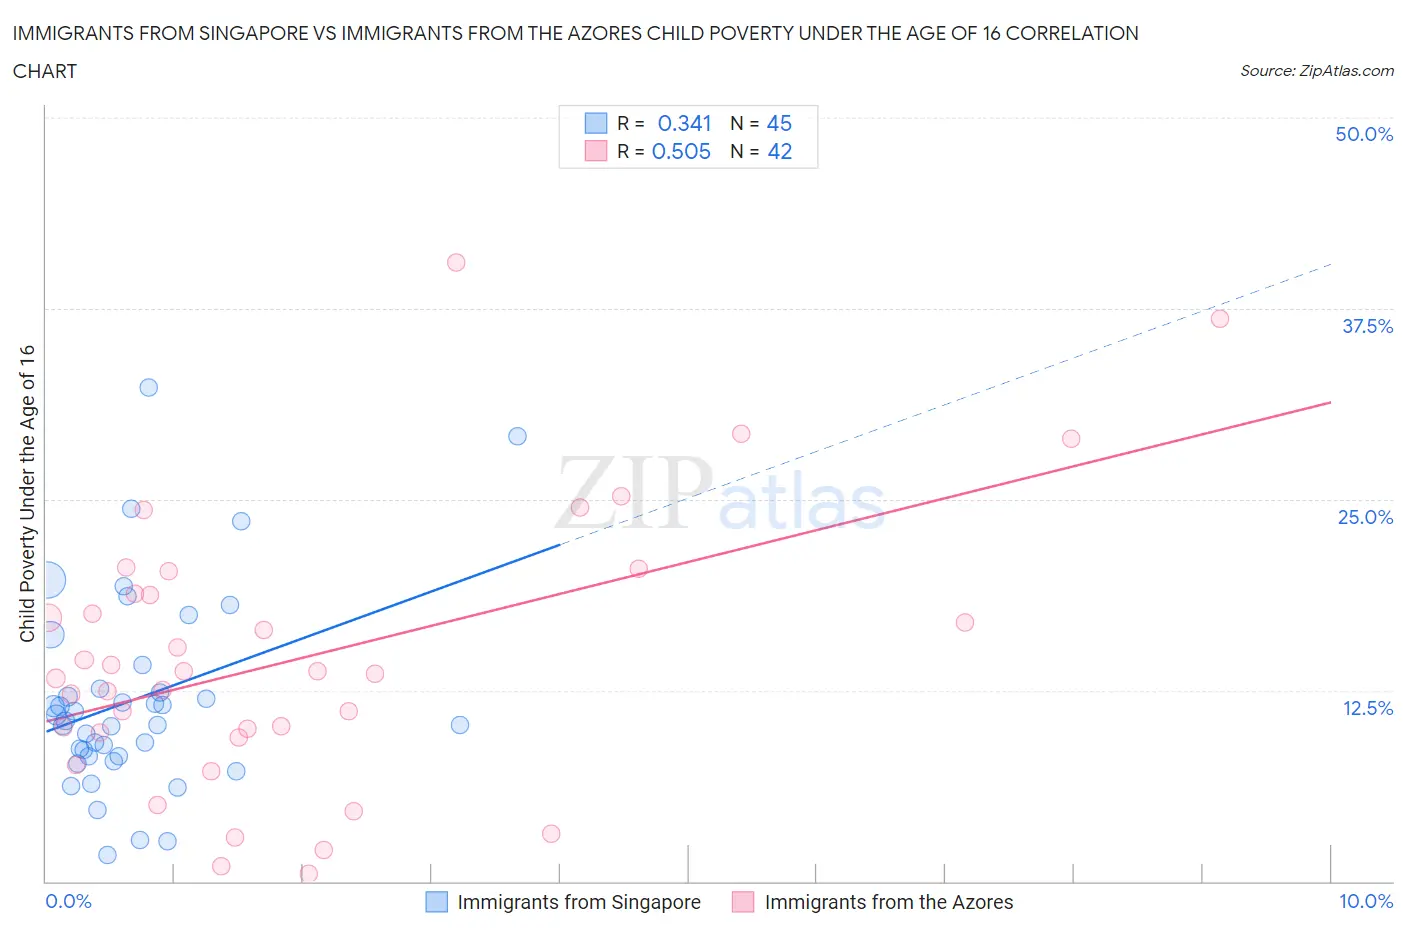 Immigrants from Singapore vs Immigrants from the Azores Child Poverty Under the Age of 16